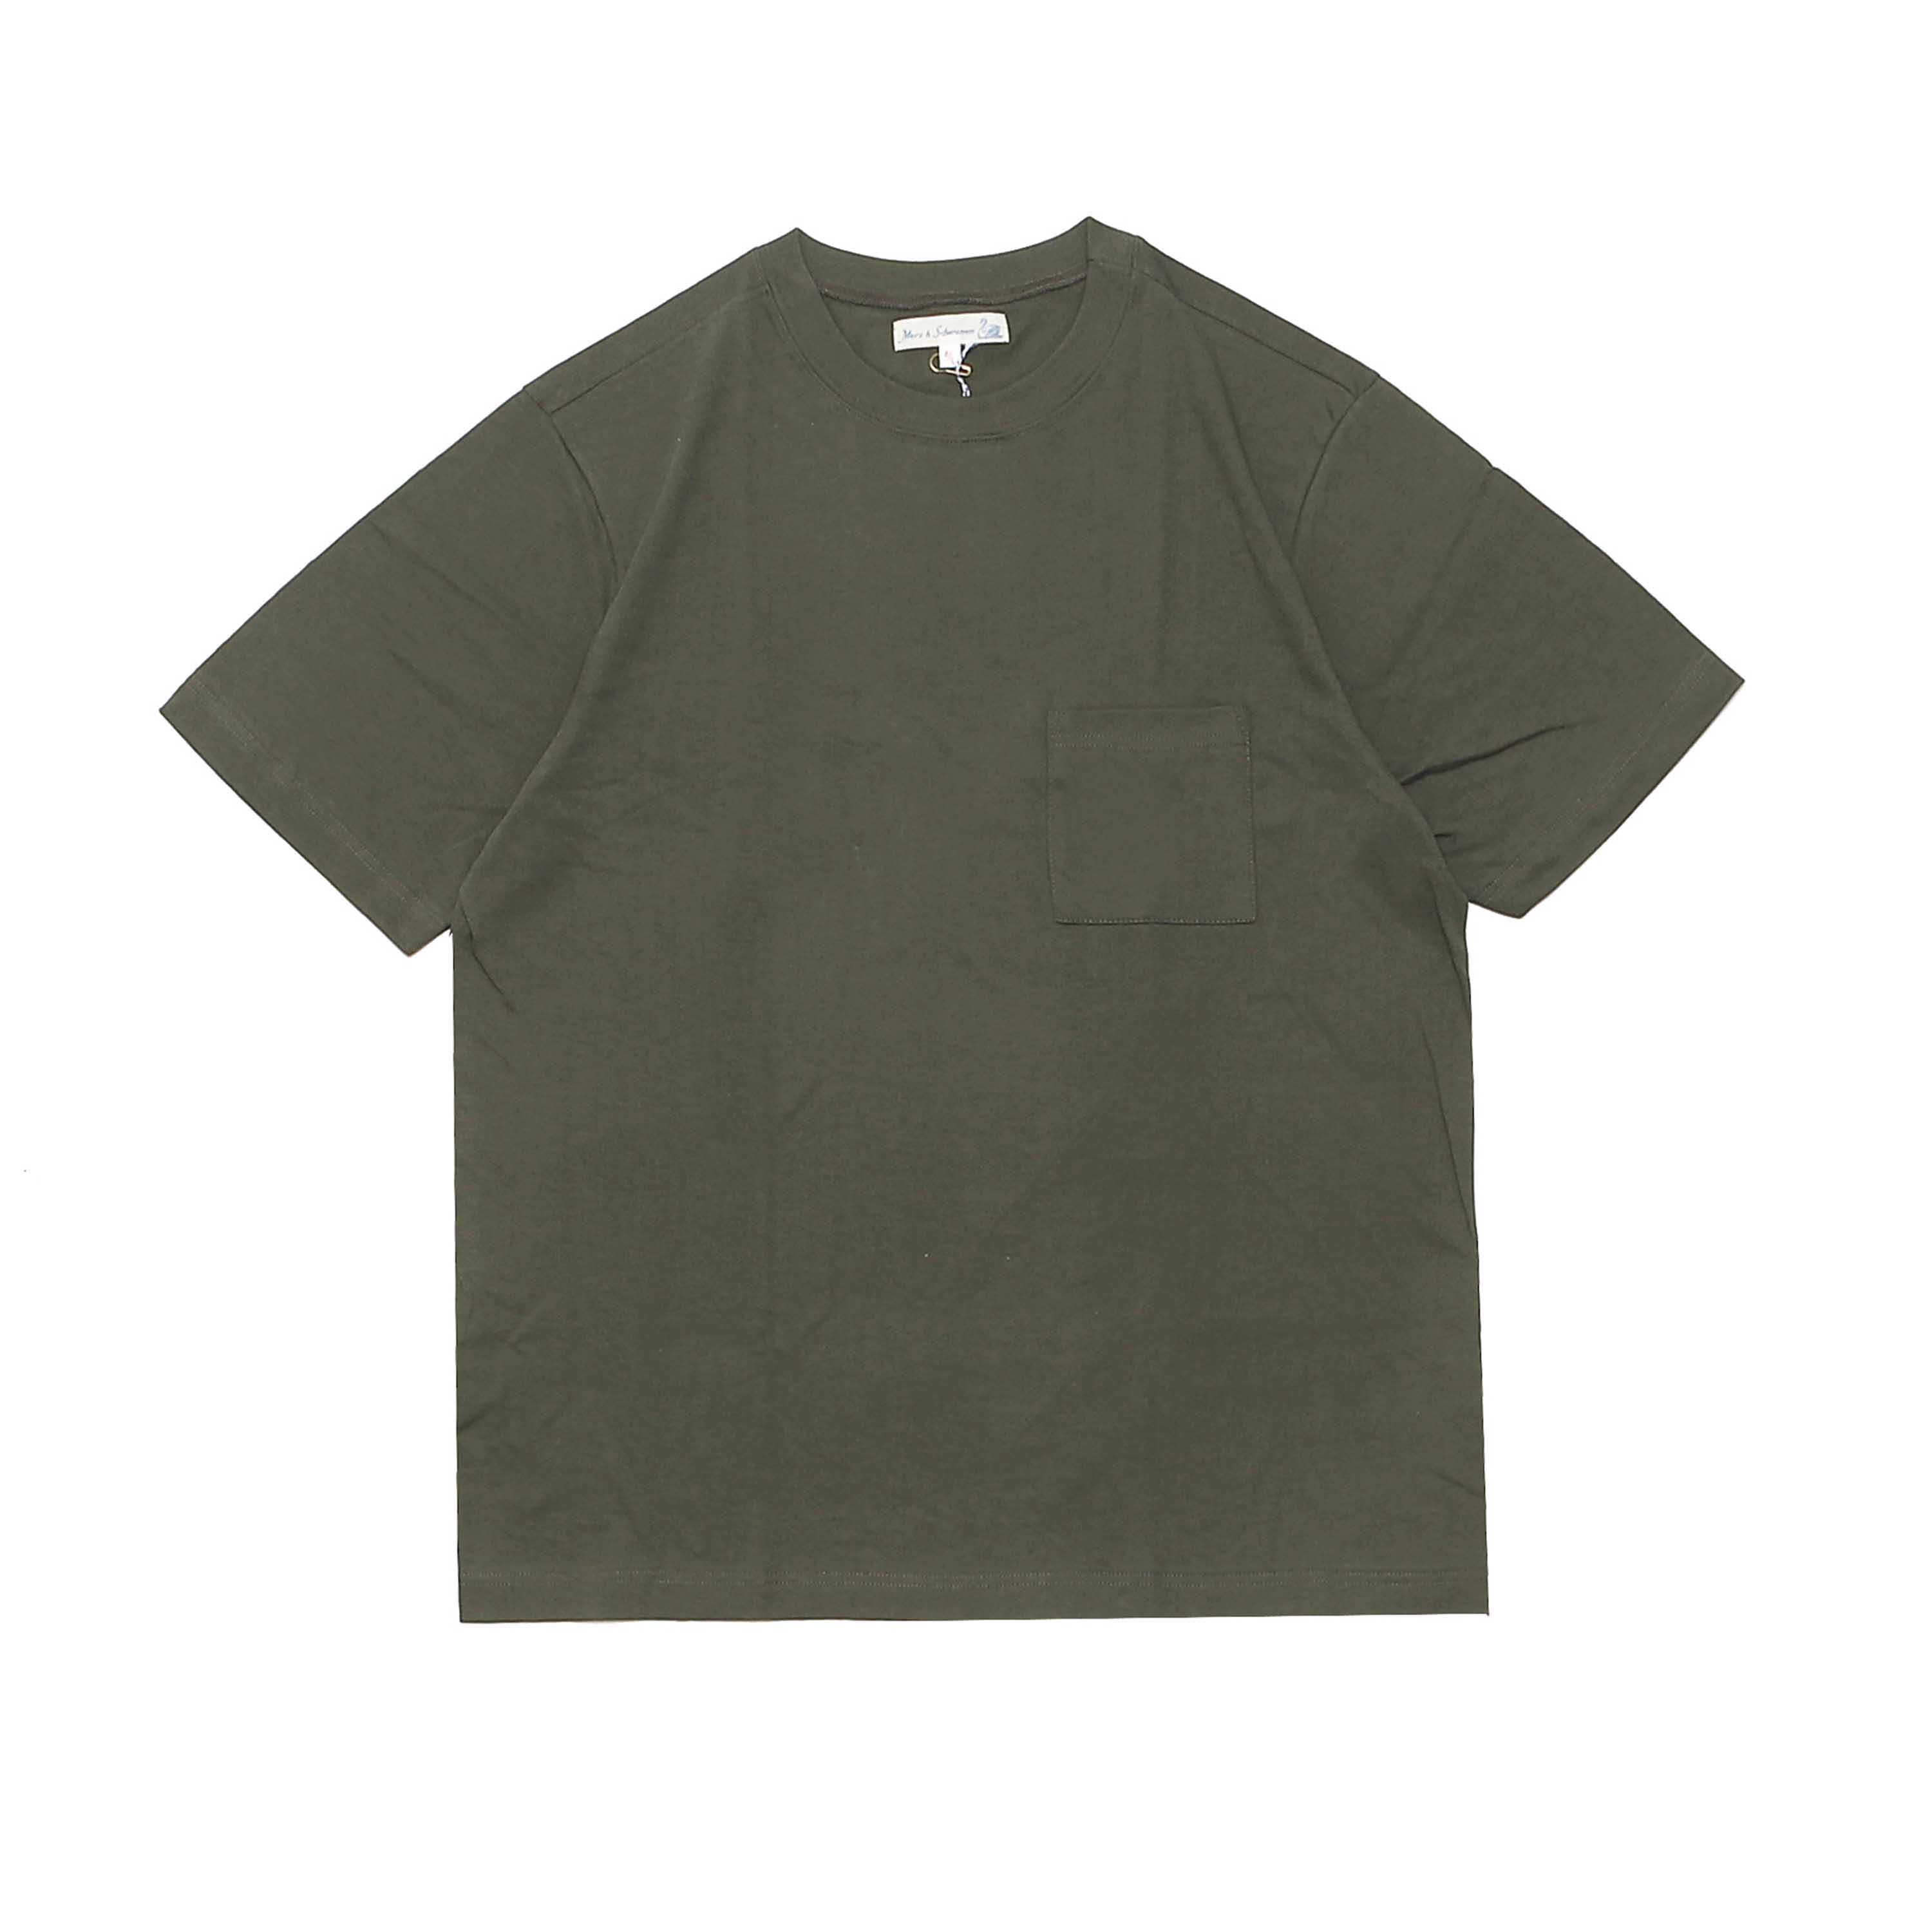 LOOPWHEELED T-SHIRT WITH POCKET(1940sP) - ARMY